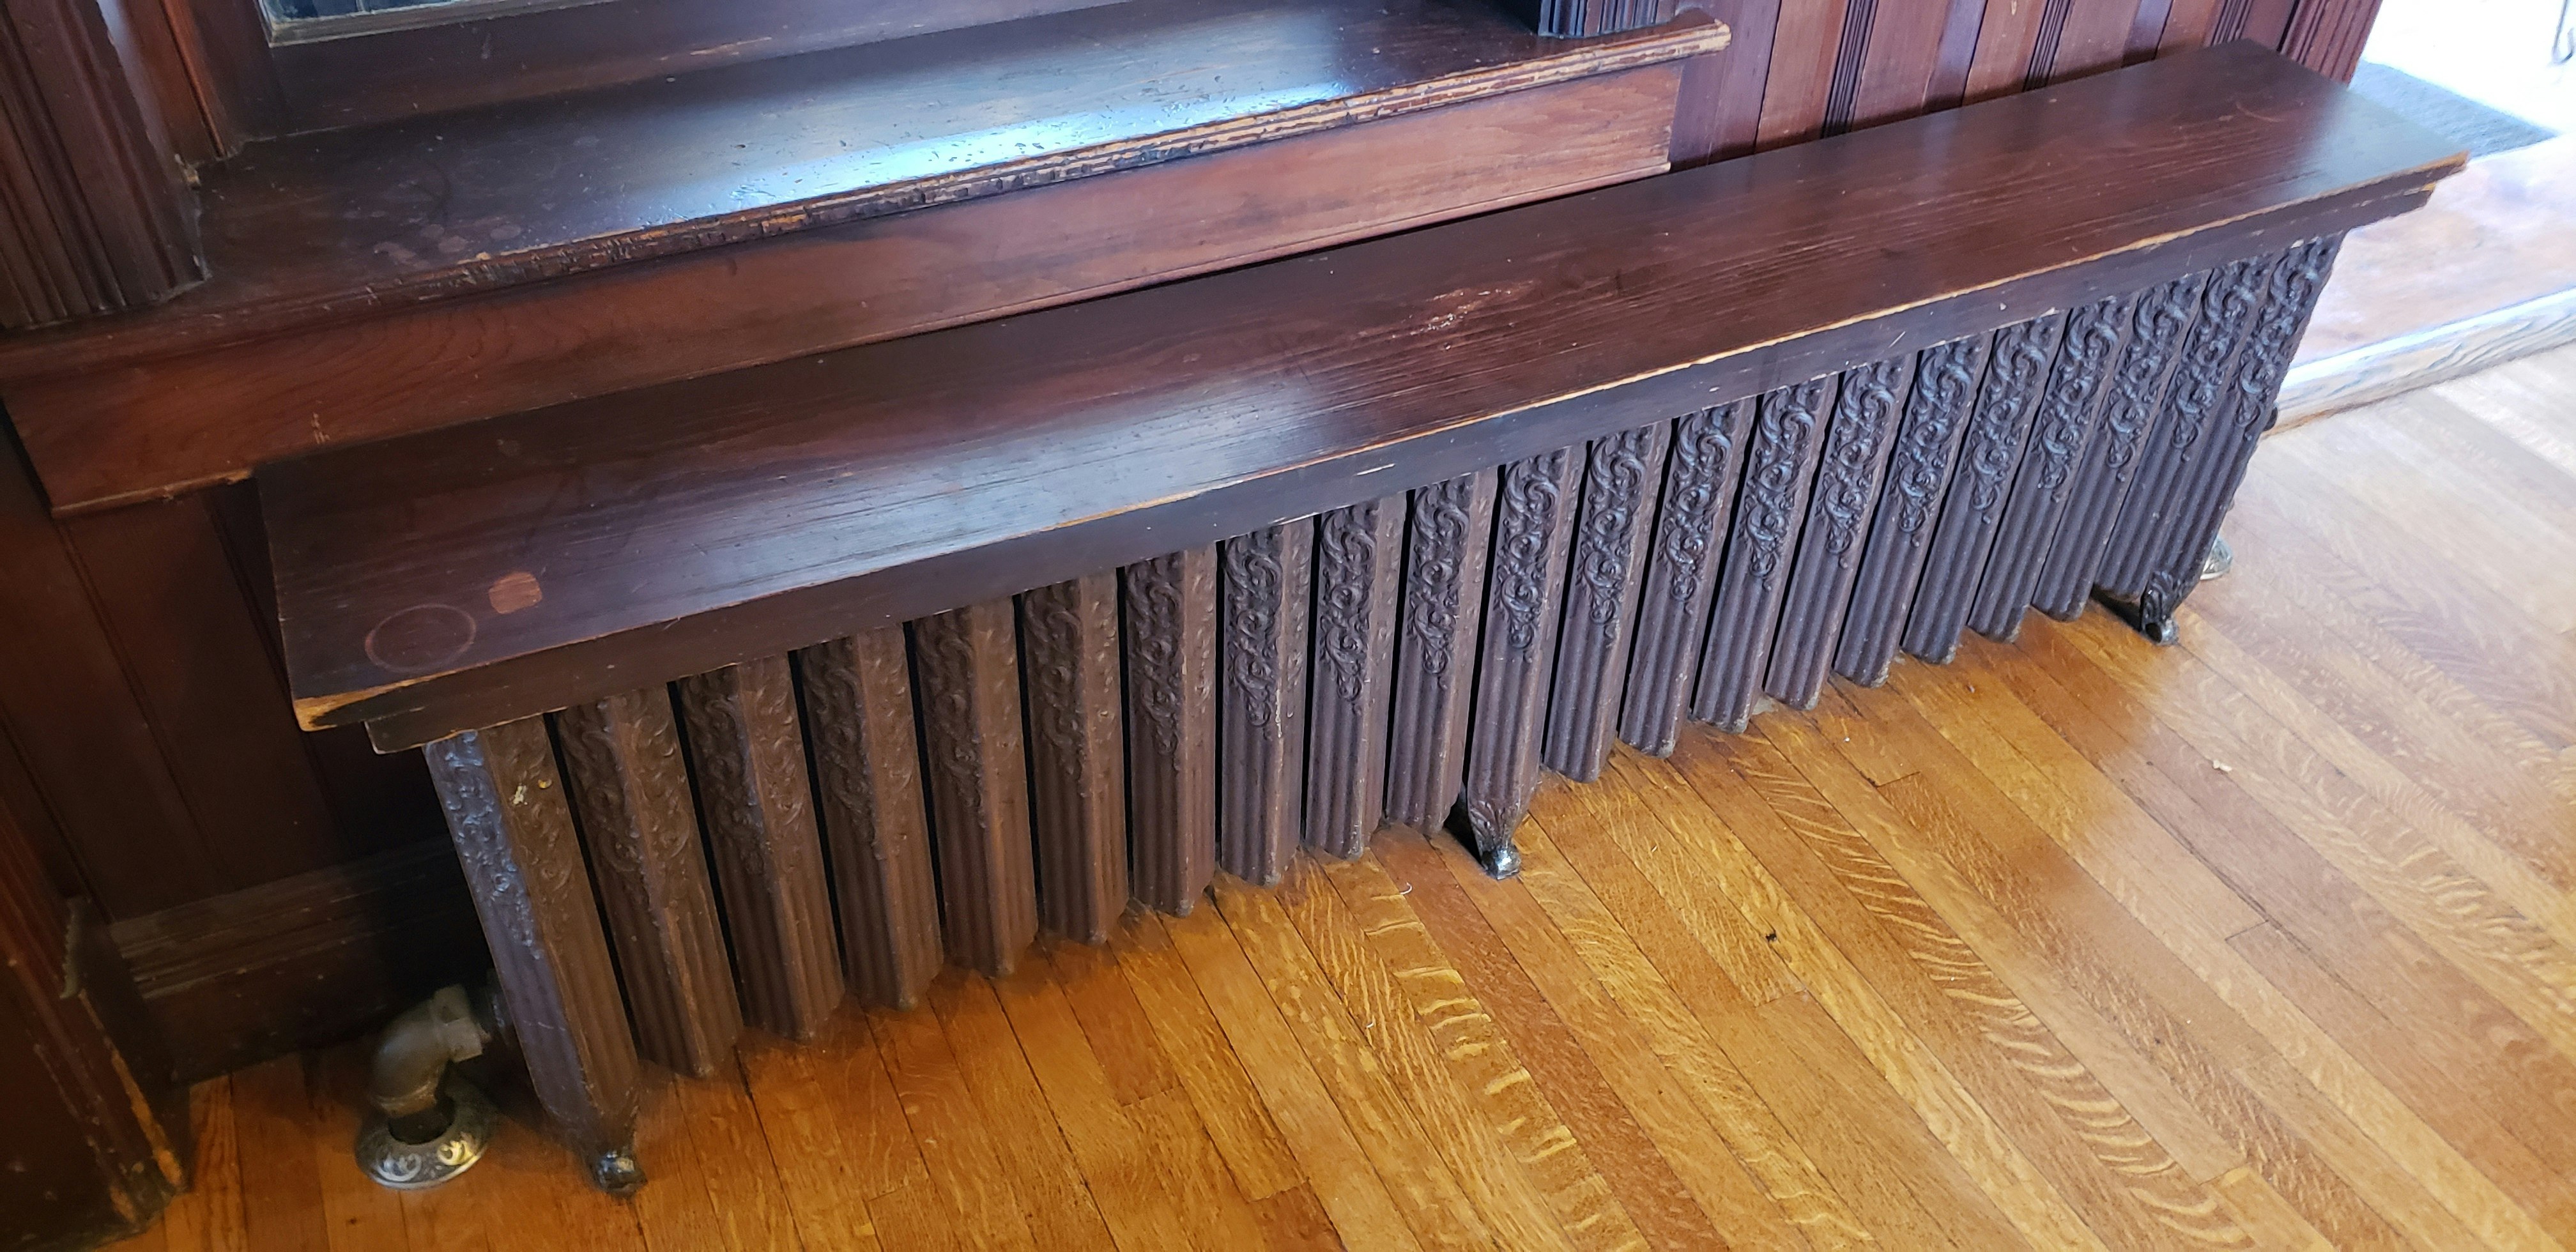 All of the radiators in the house feature benches for sitting.